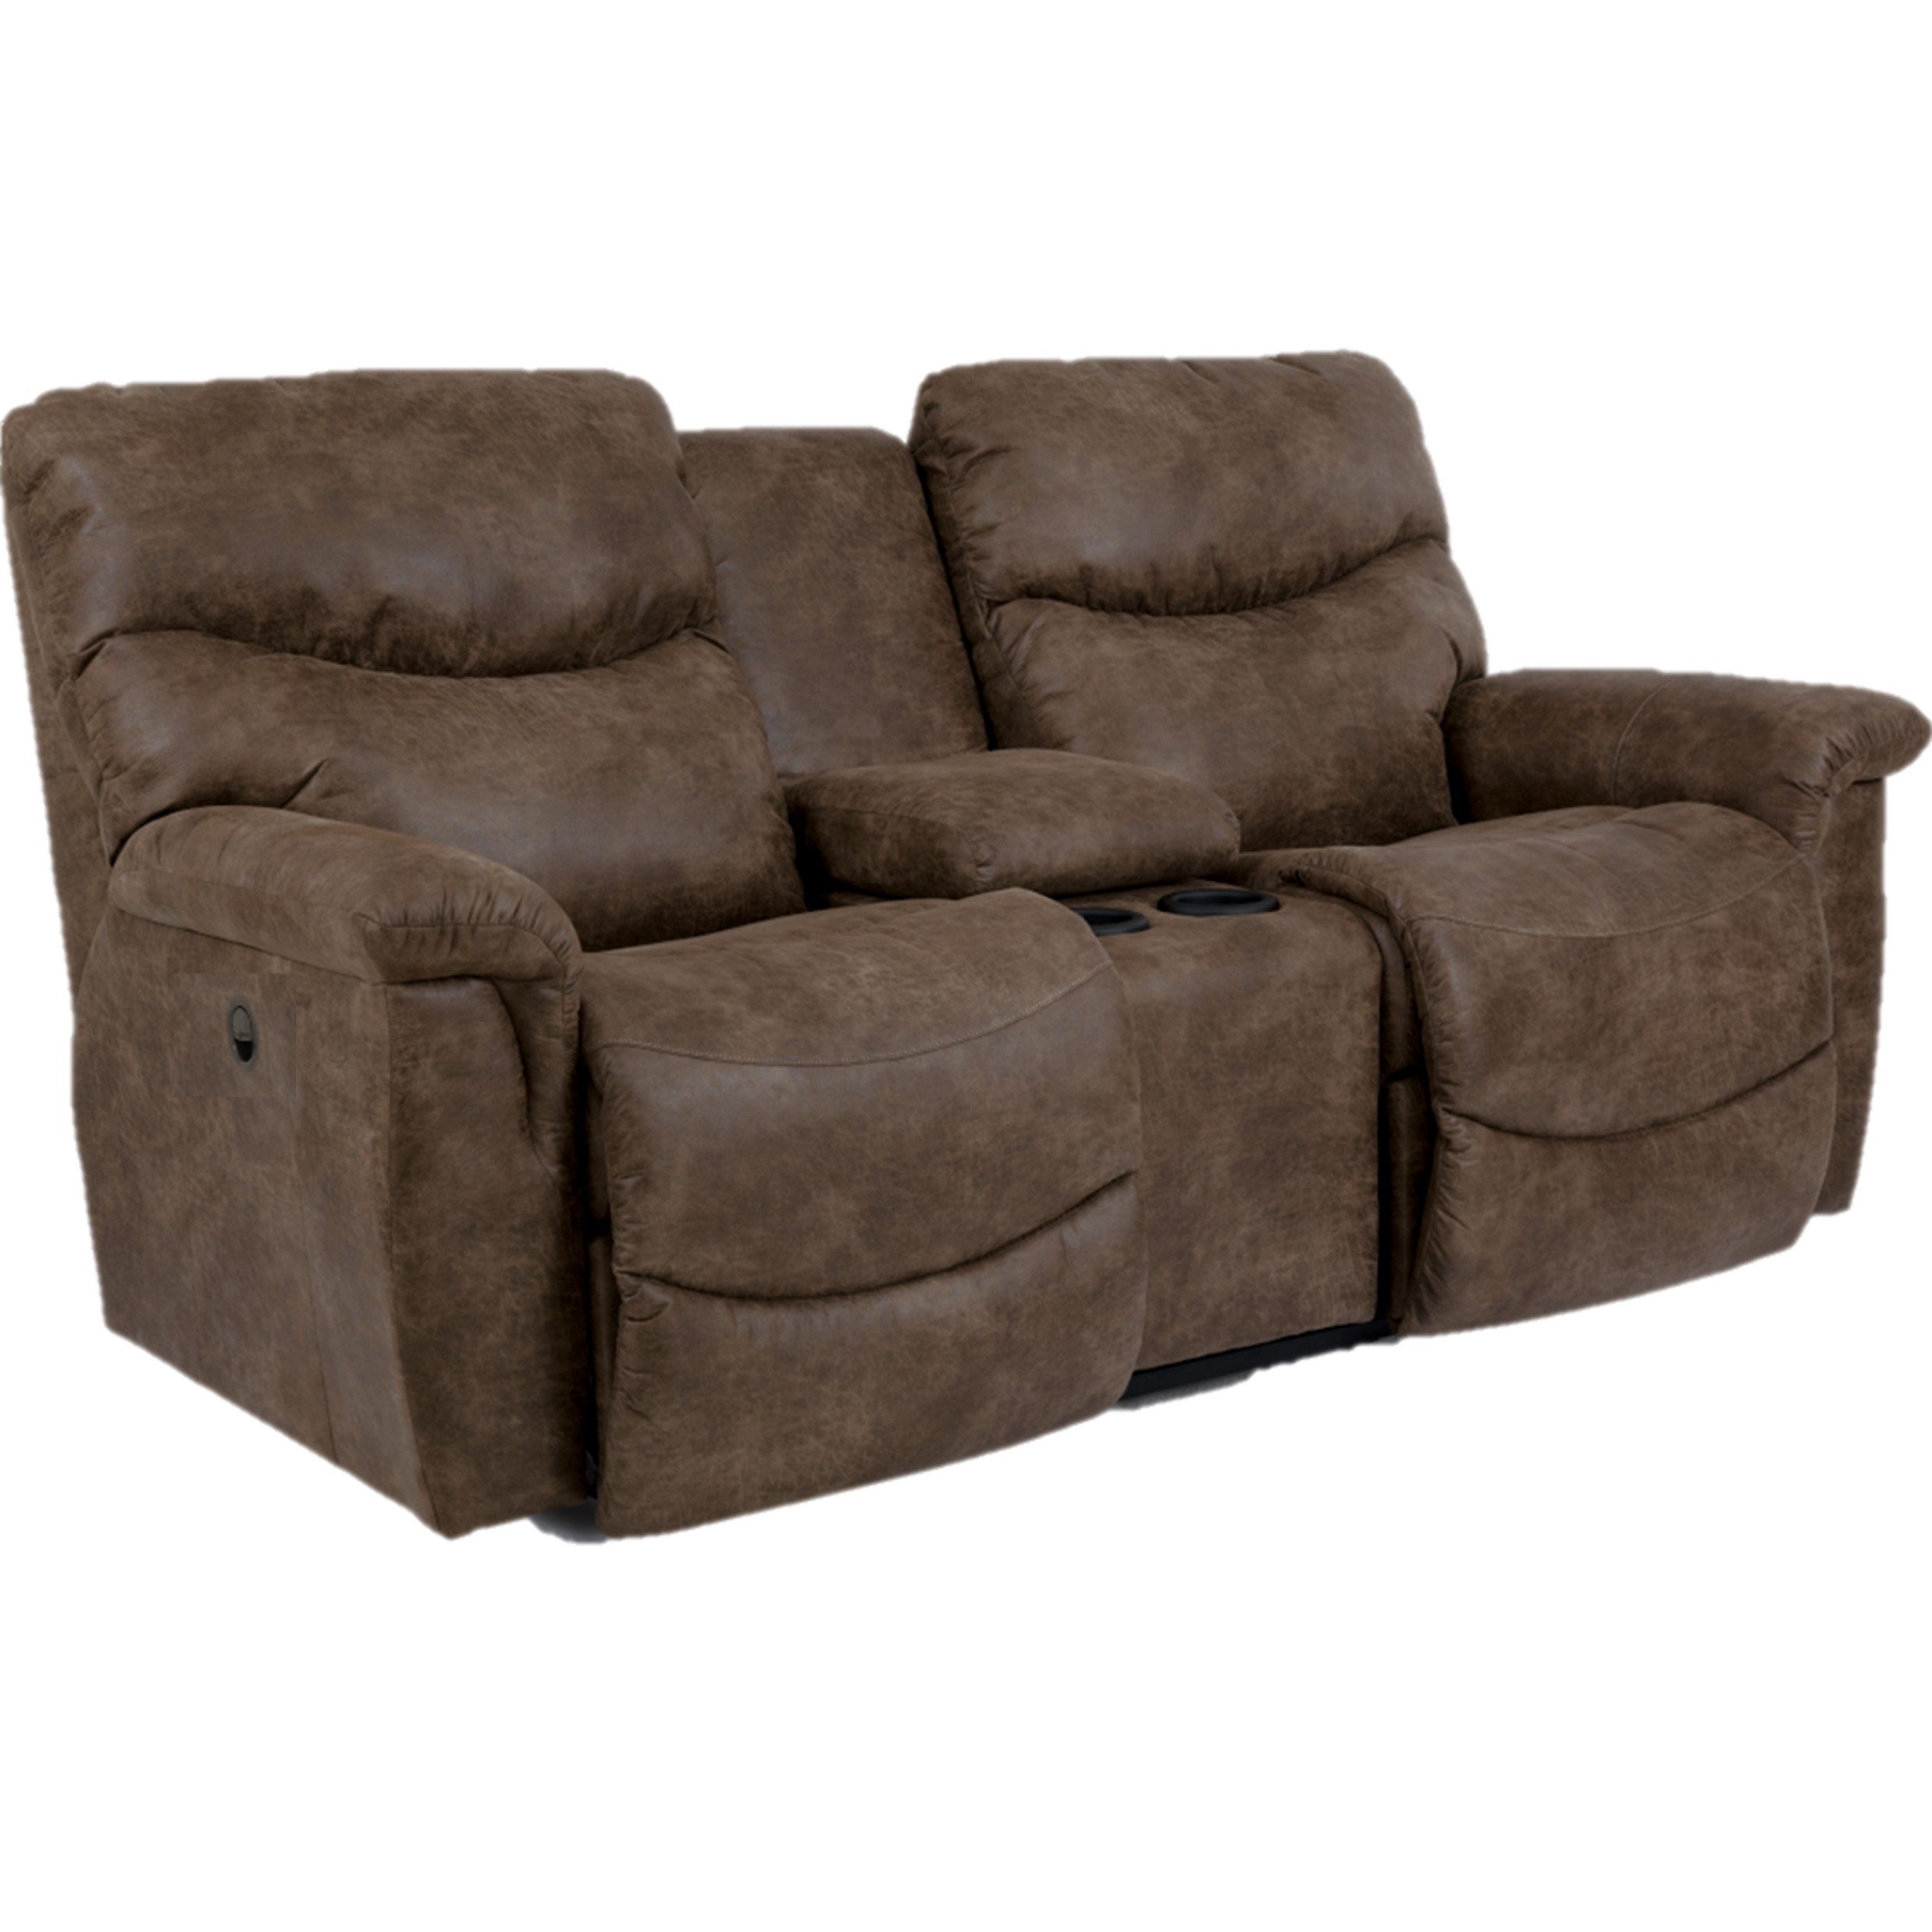 James 521-re9947-78 loveseat w console